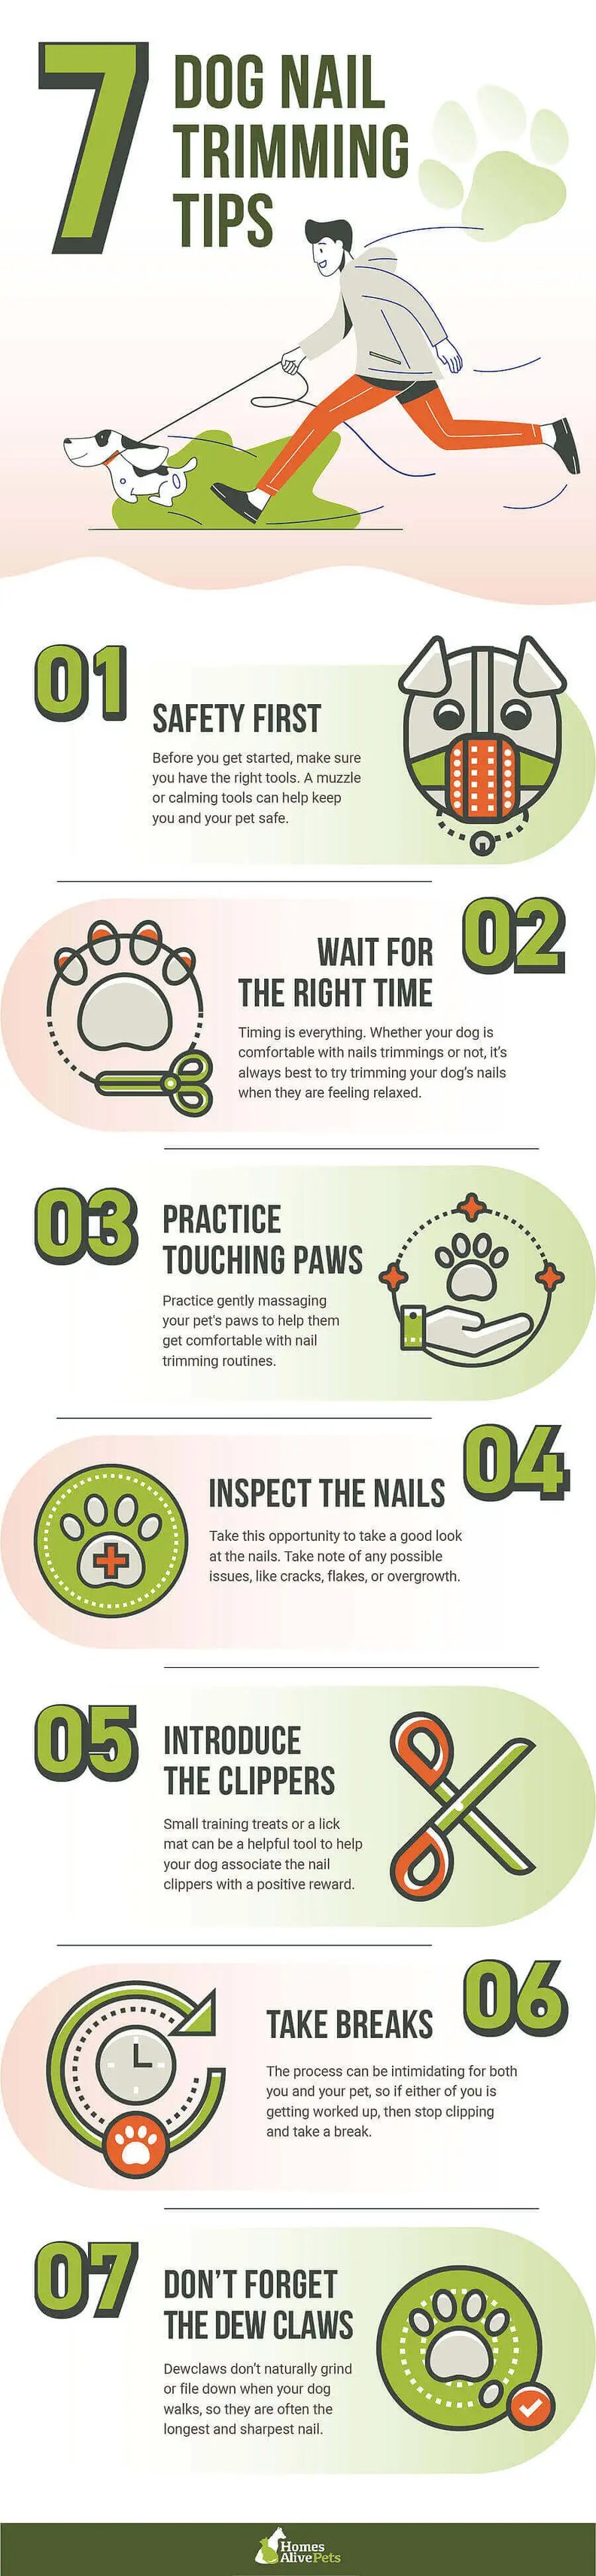 7 Dog Nail Trimming Tips - updated